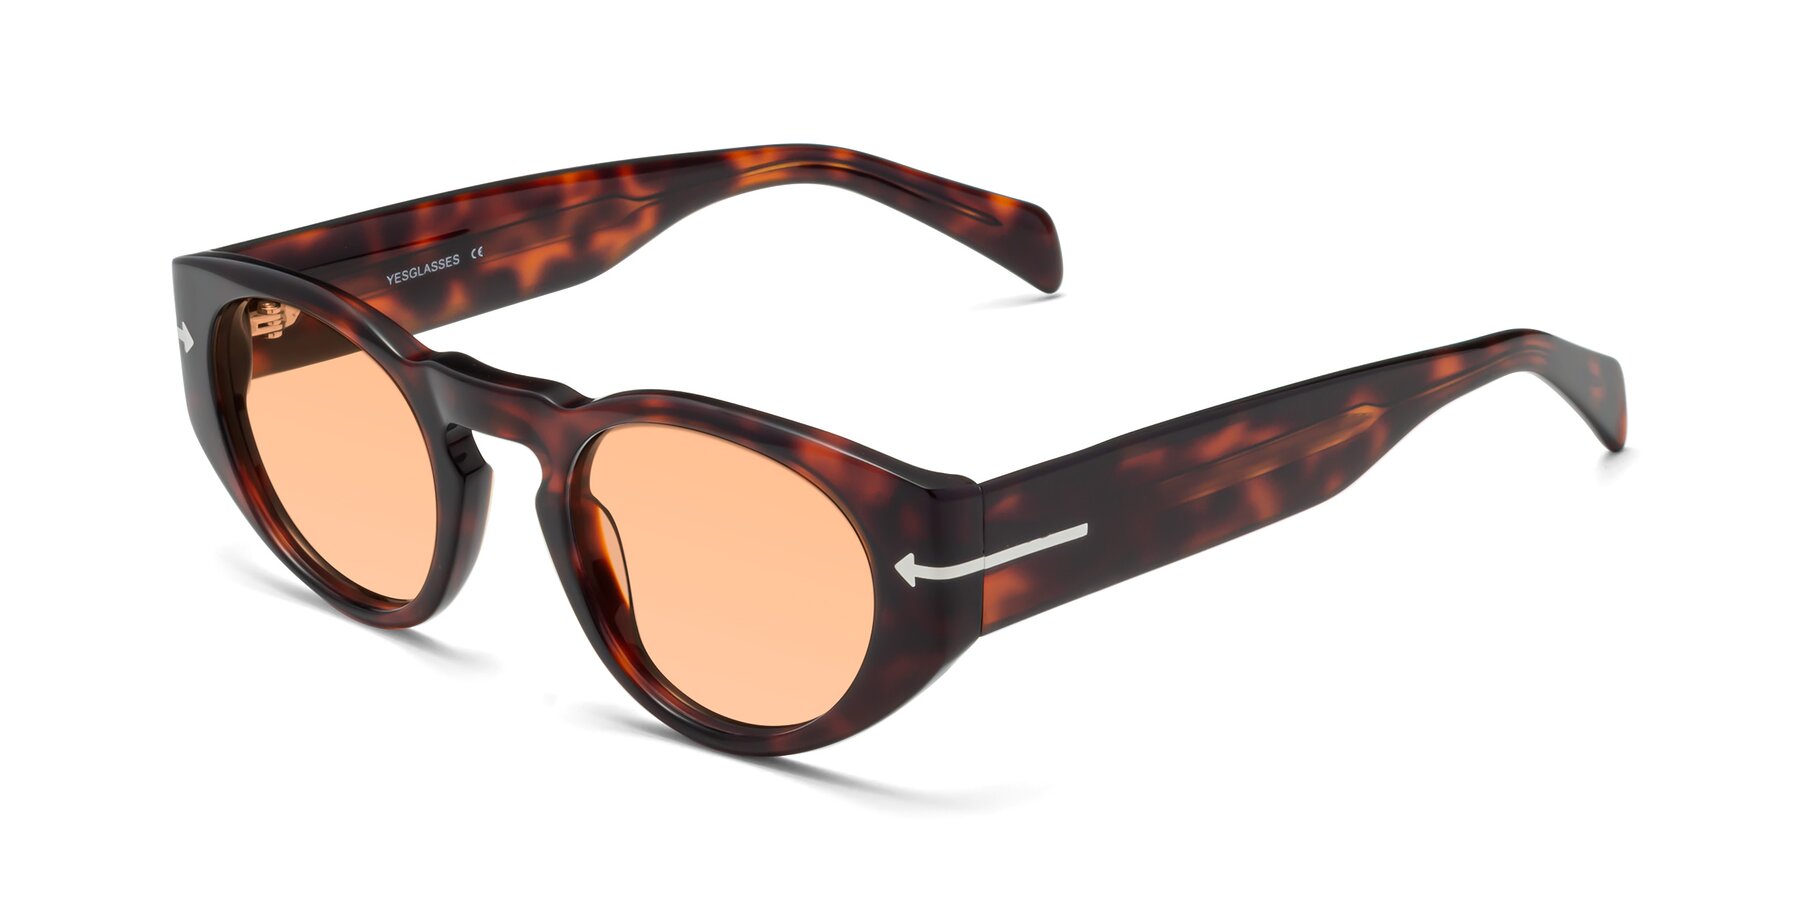 Angle of 1578 in Tortoise with Light Orange Tinted Lenses